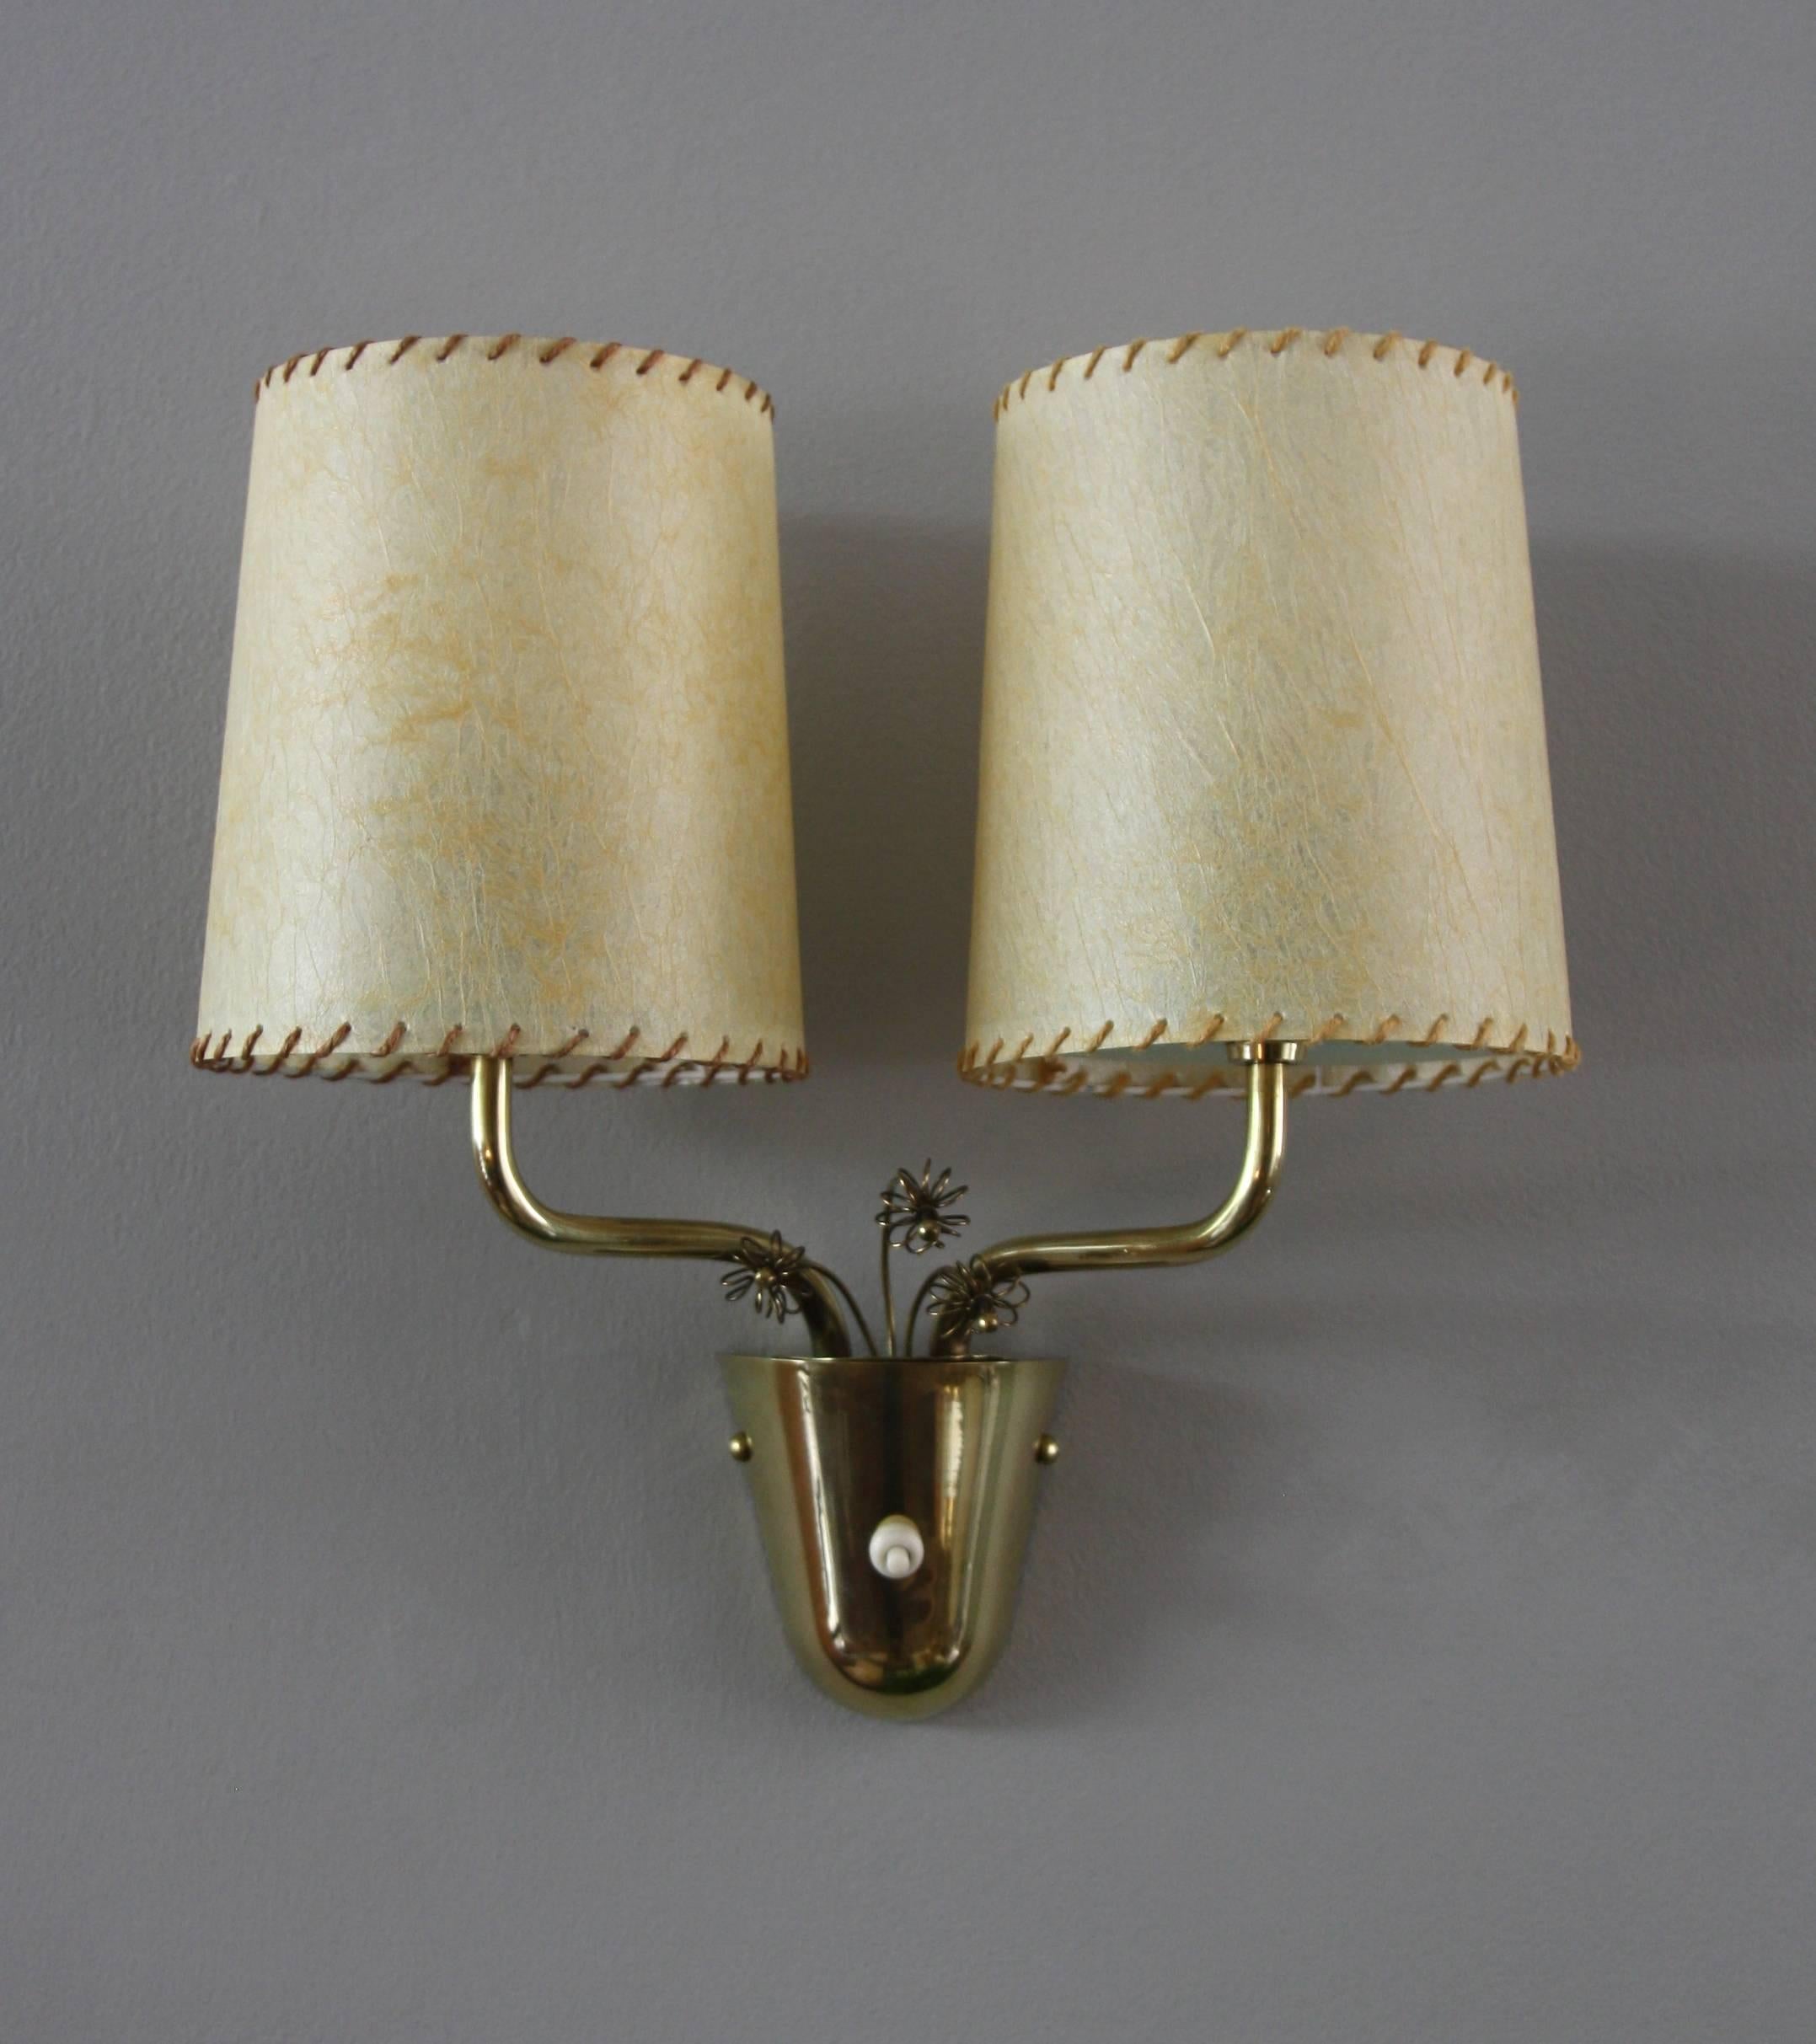 A vintage mid-20th century wall light designed by Paavo Tynell for Taito Oy, Finland. 

Made, circa 1955 the wall lamp with three delicate-looking brass flowers is a great example of Tynell's design. 

The juxtaposition of the materials used in